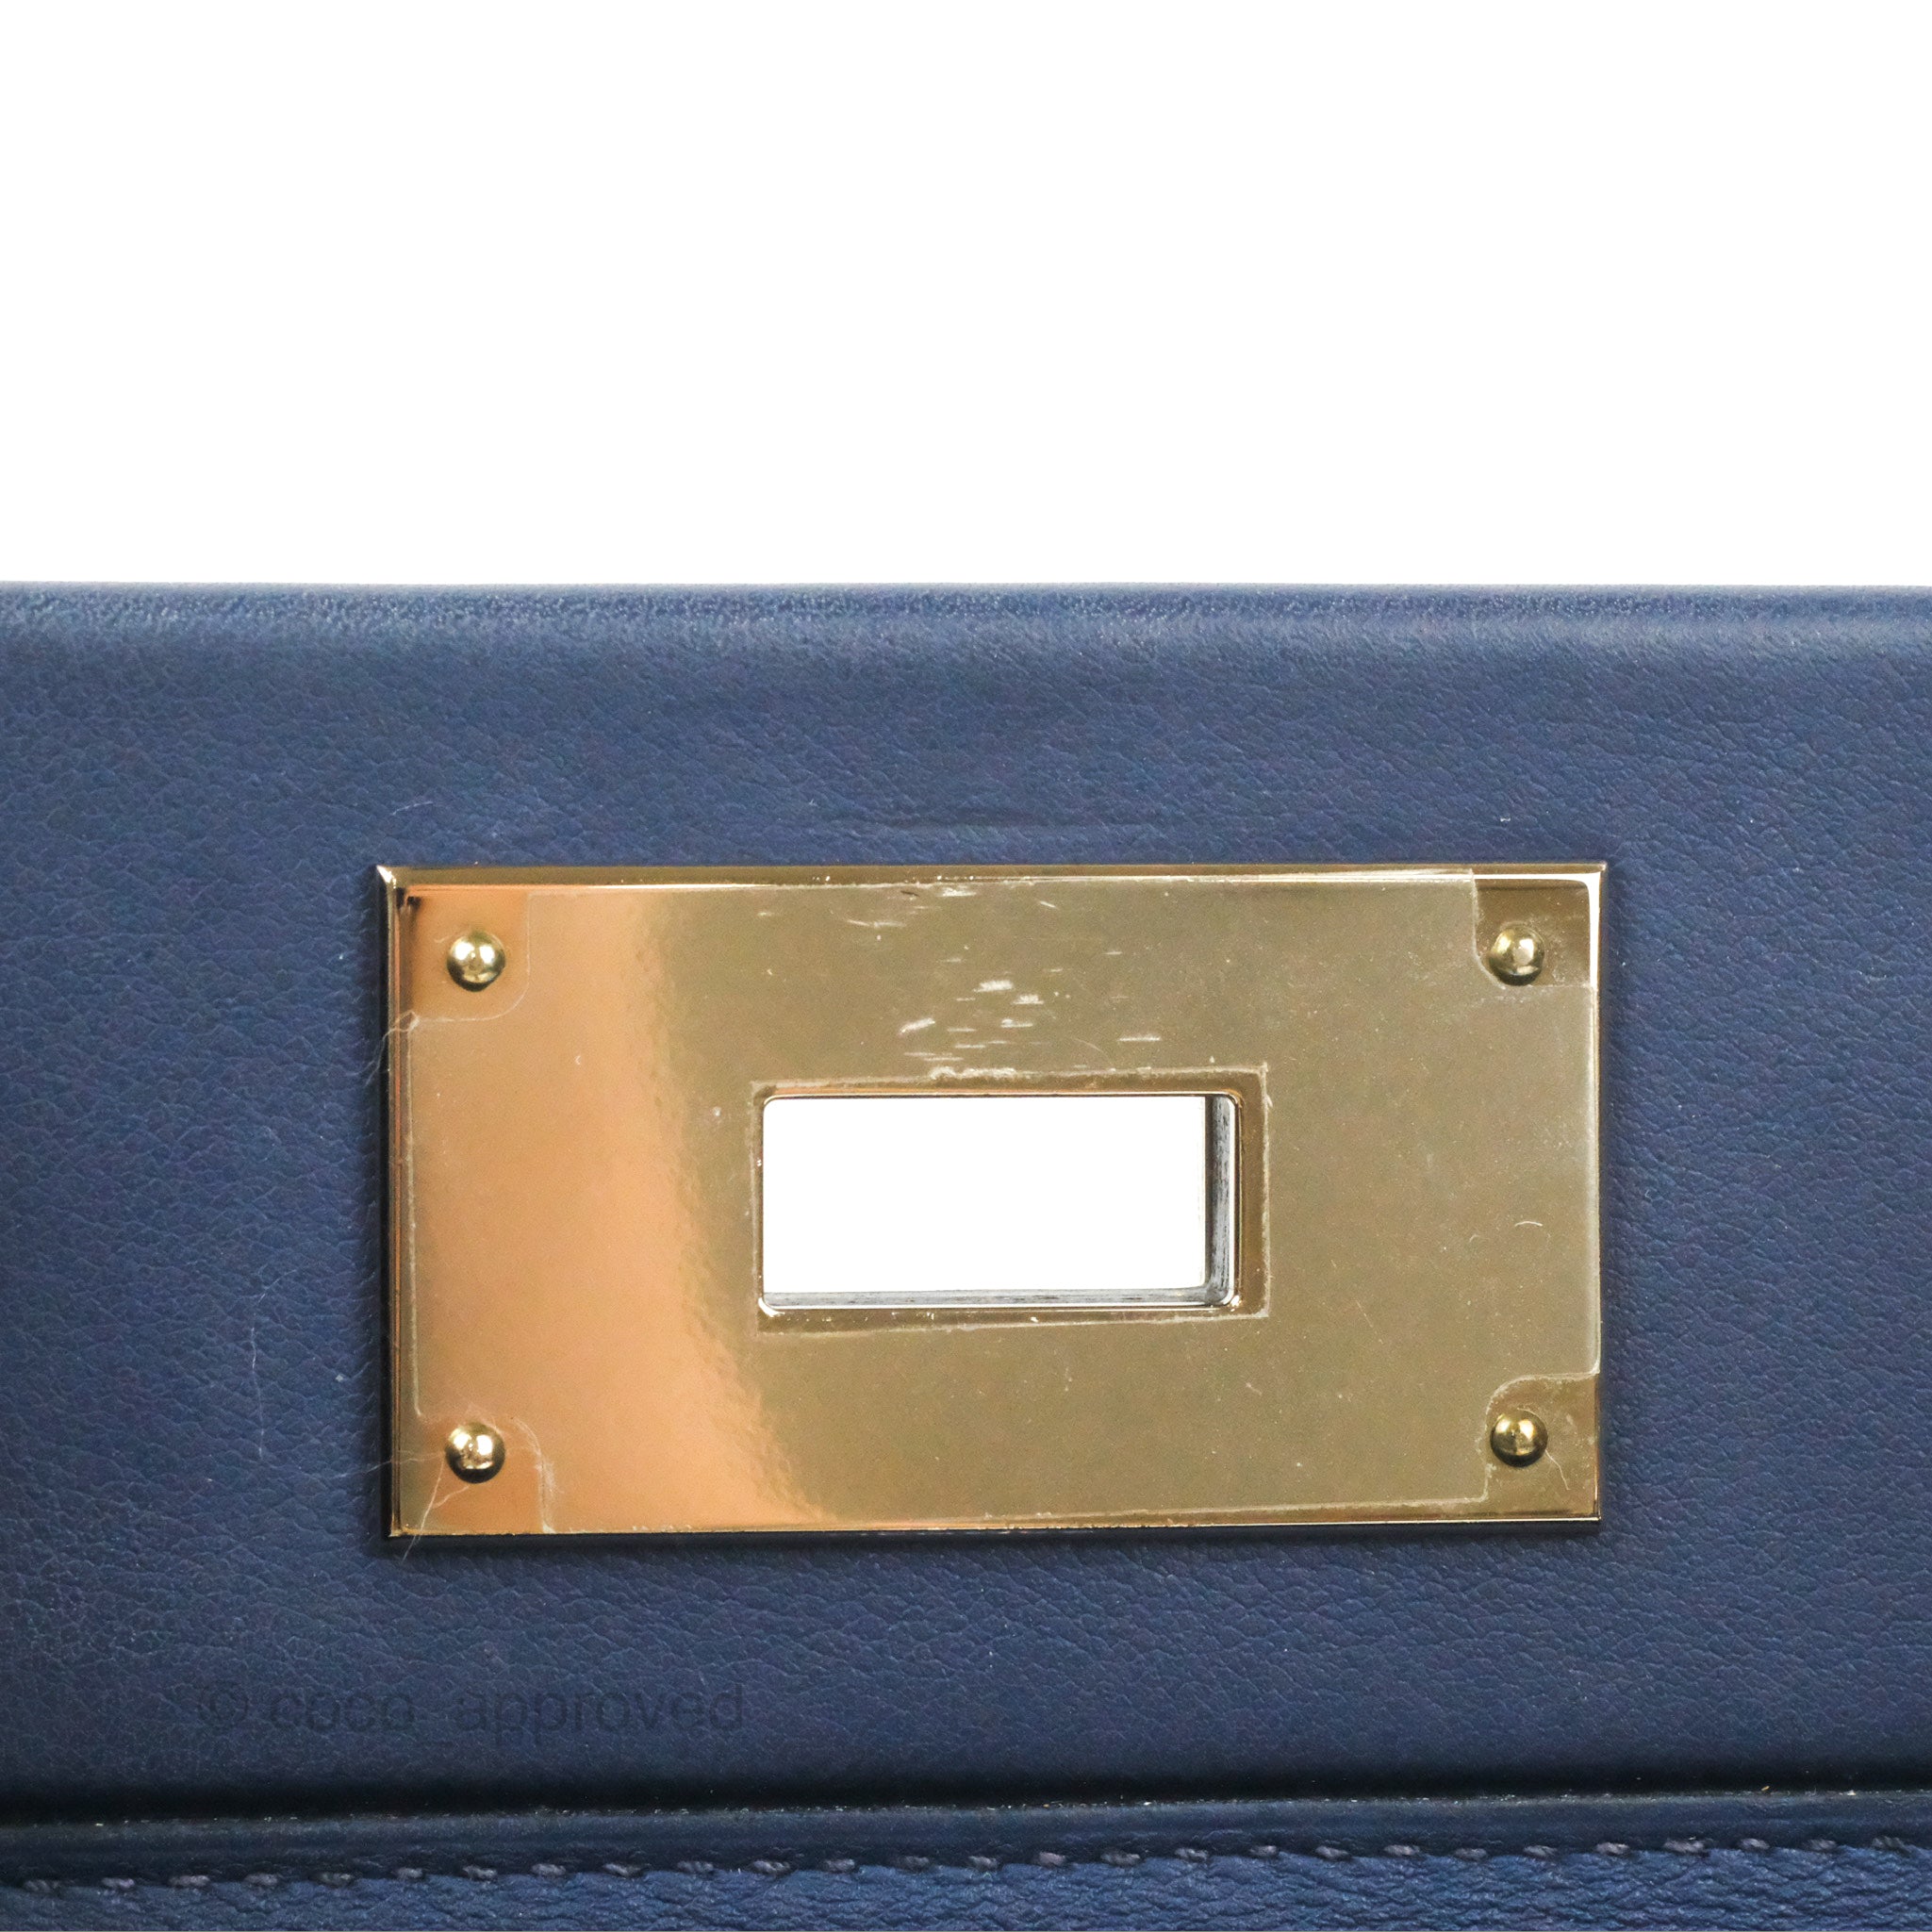 HERMÈS 24/24 - 21 handbag in Bleu Nuit, Black, Caban and Bleu France  Evercolor leather with Permabrass hardware-Ginza Xiaoma – Authentic Hermès  Boutique